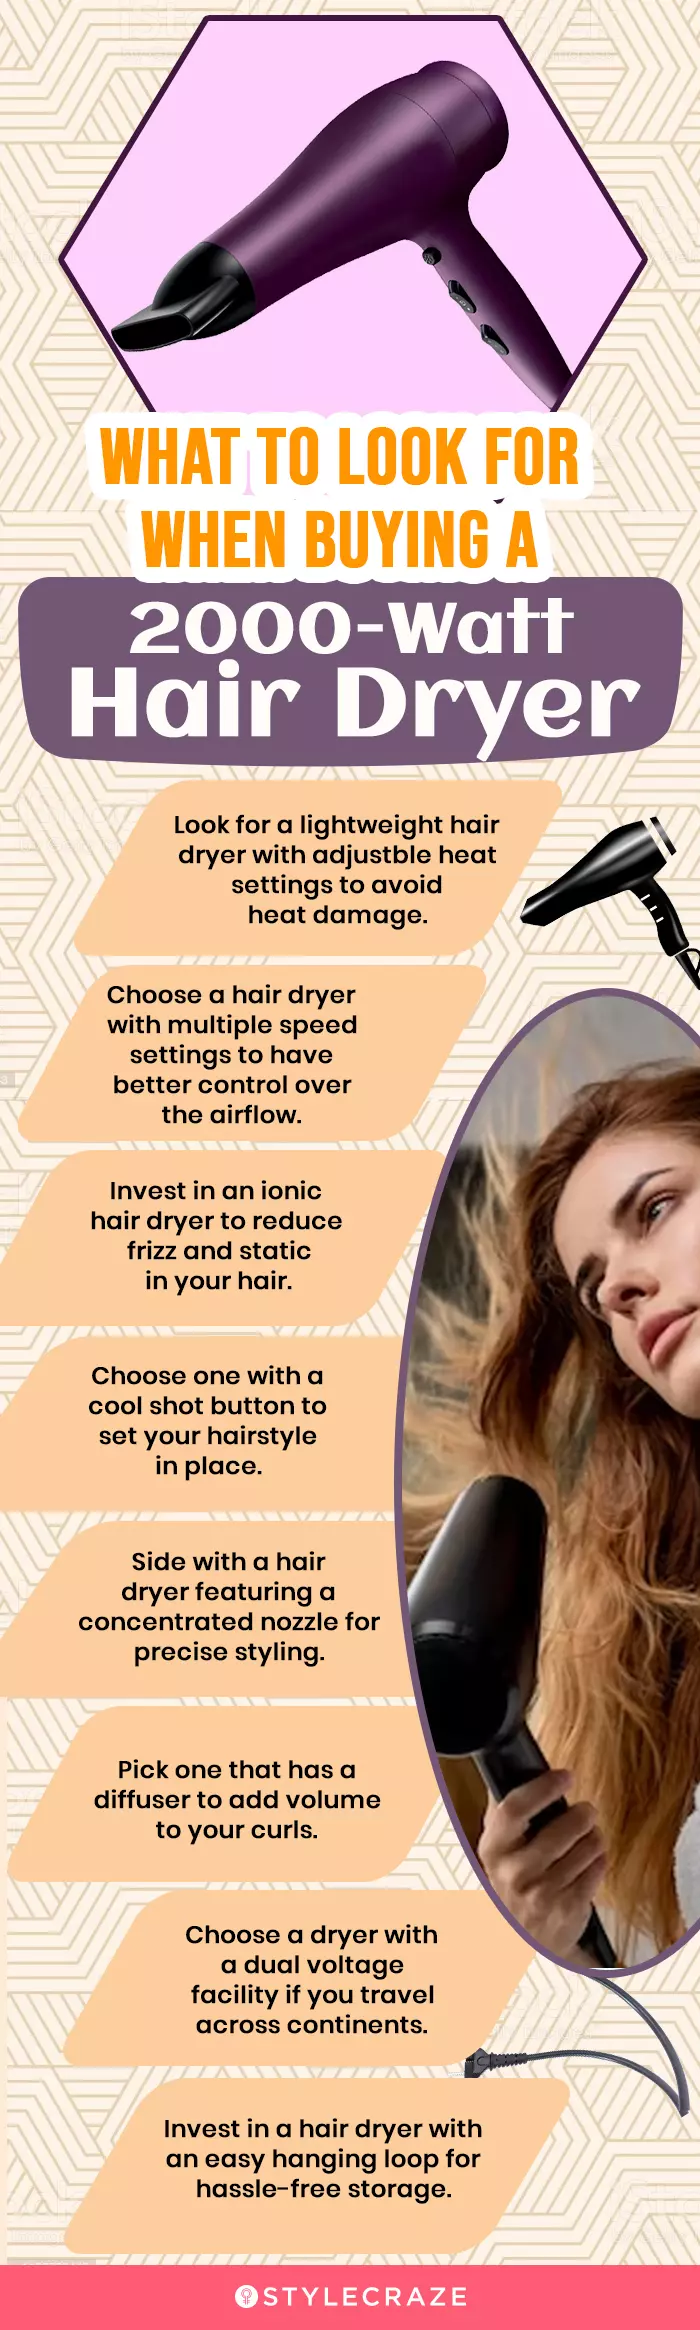 What To Look For When Selecting A 2000-Watt Hair Dryer